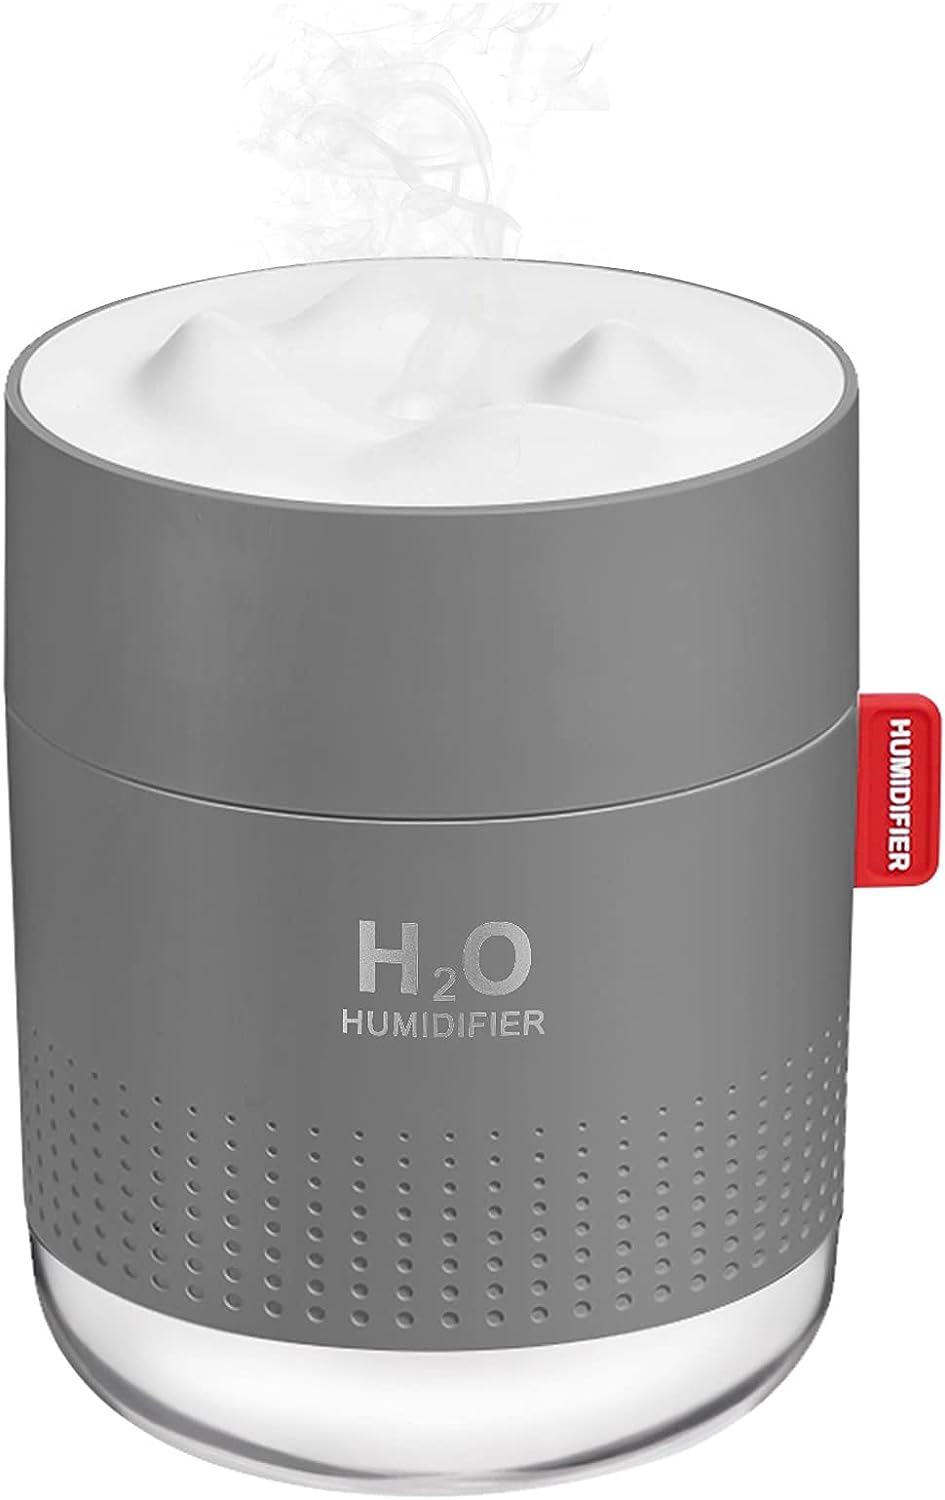 infant humidifier